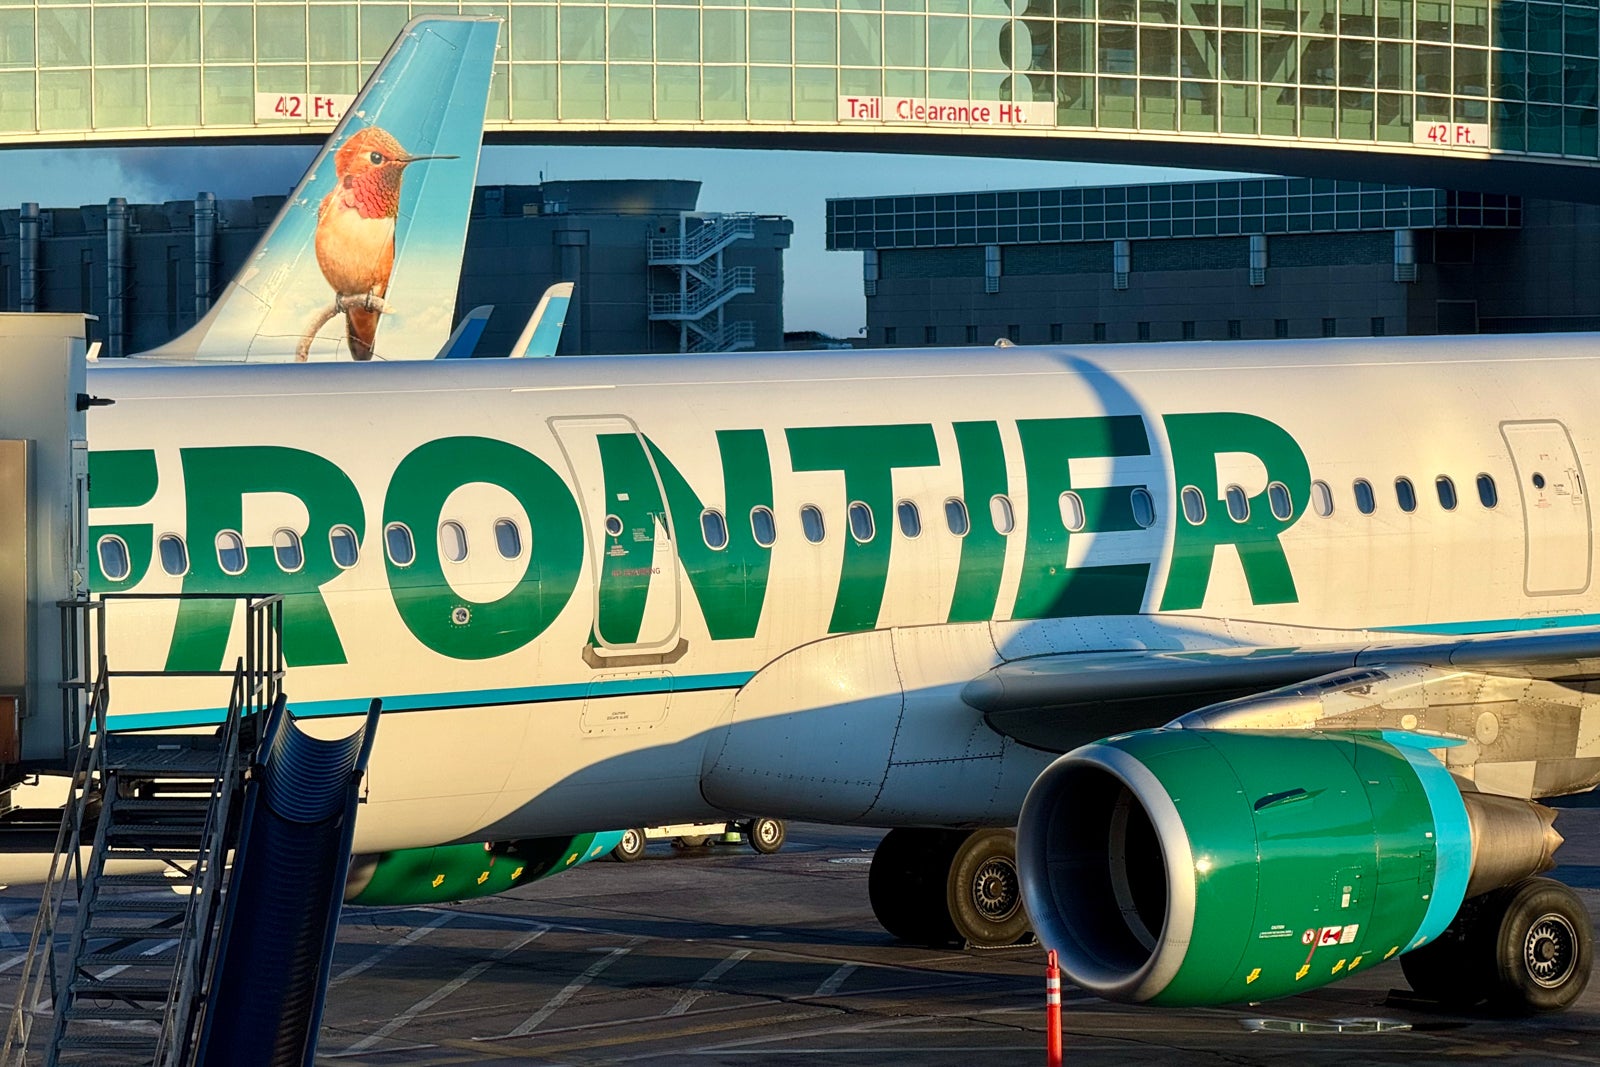 Frontier broadcasts 8 new routes from Philadelphia